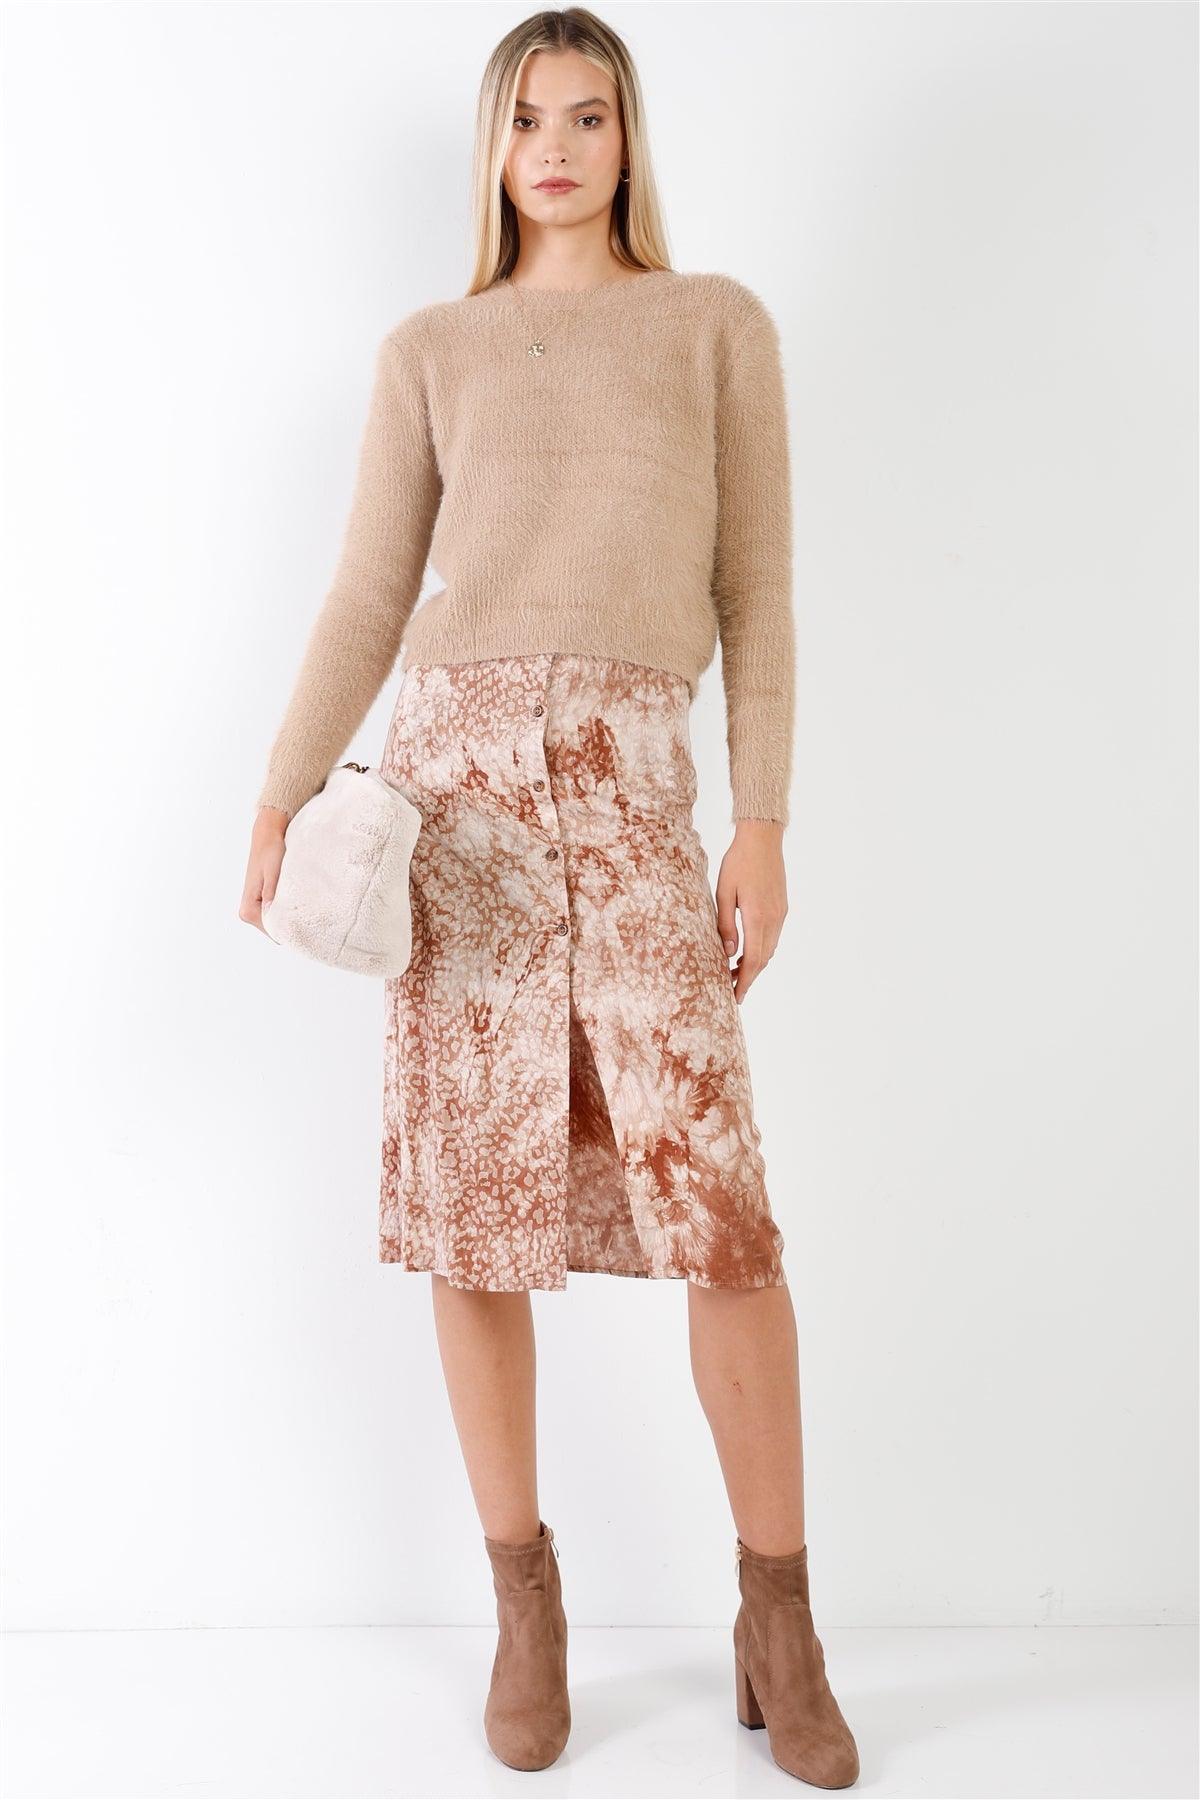 Coffee Cream Tie Dye High Waisted Front Button Down Midi Skirt /3-2-1